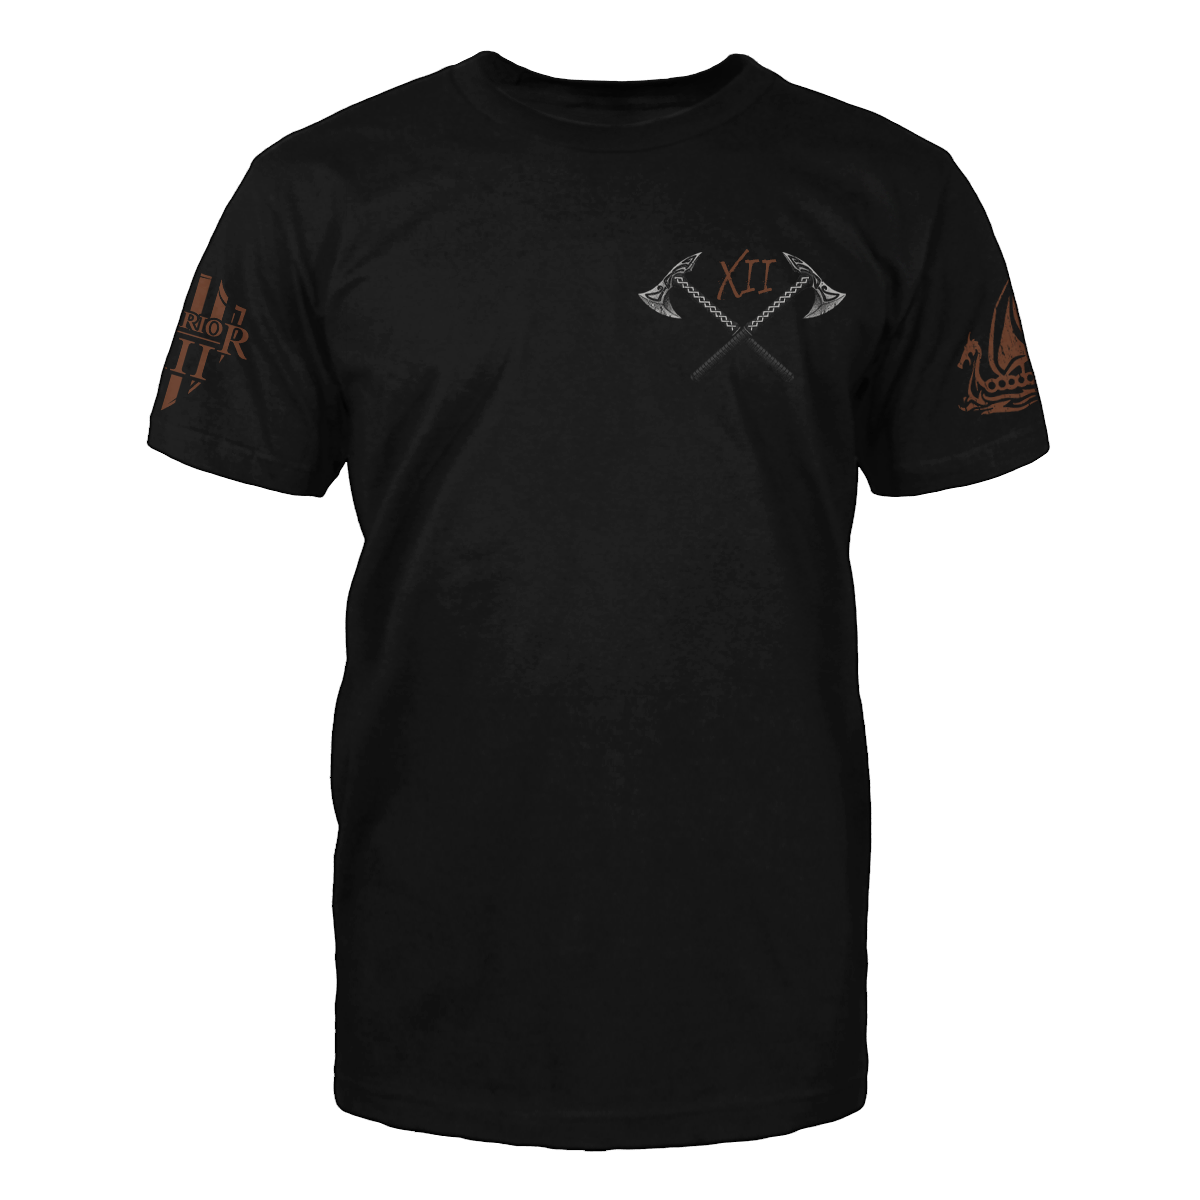 The front of a black t-shirt with a small pocket image on the front of two crossed axes.